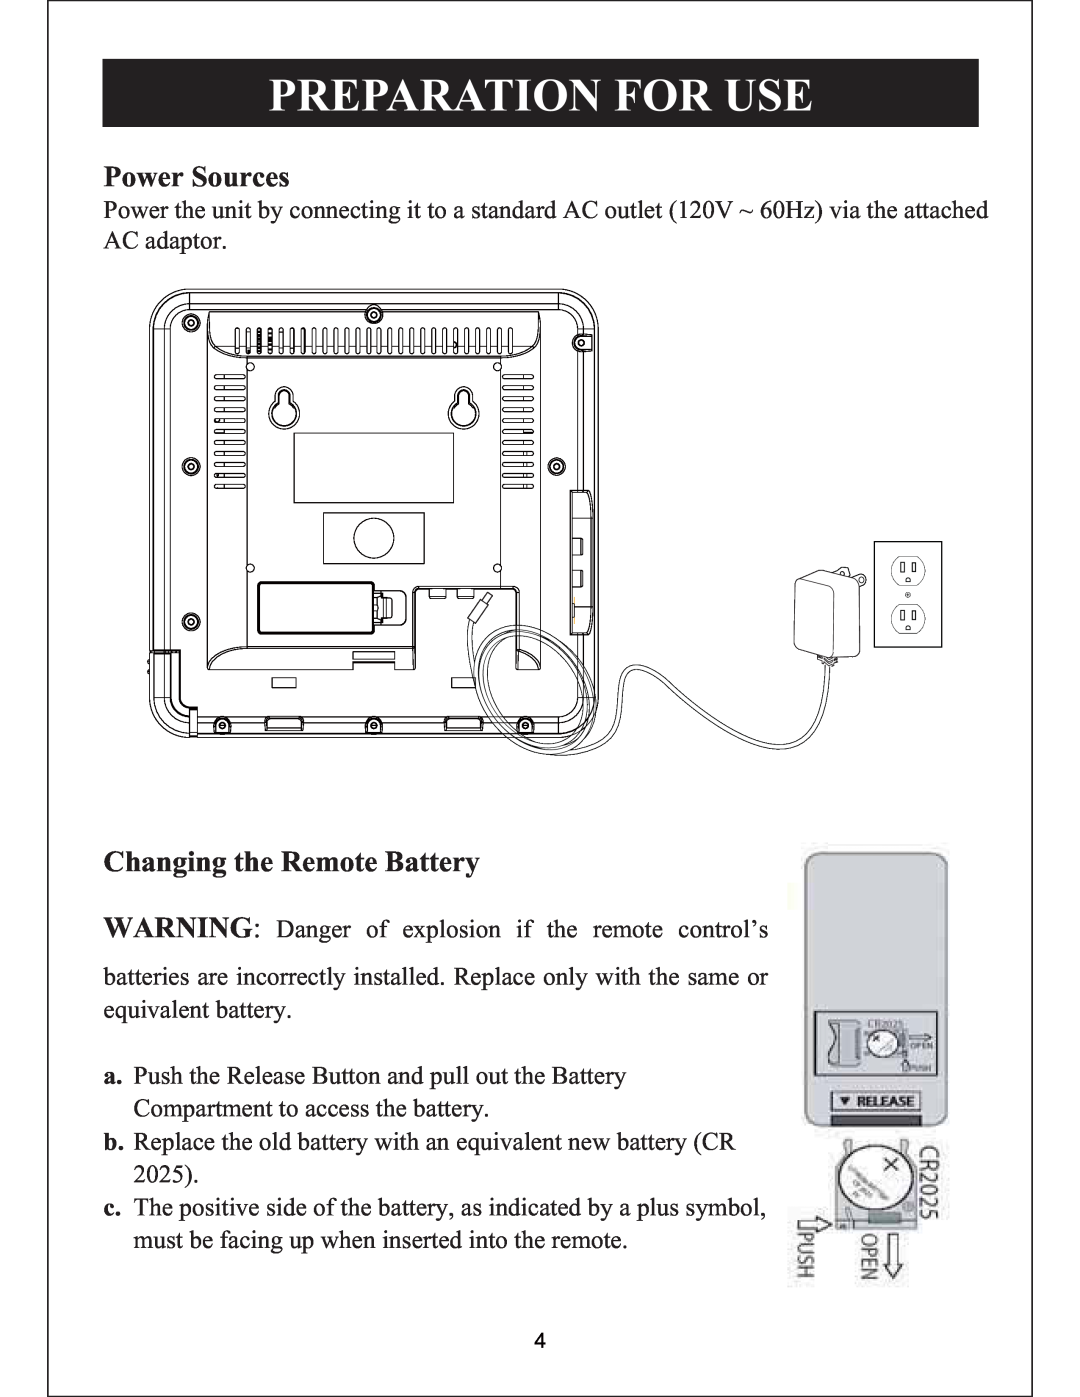 Sylvania SIP3019 instruction manual Power Sources, Changing the Remote Battery, Preparation For Use 